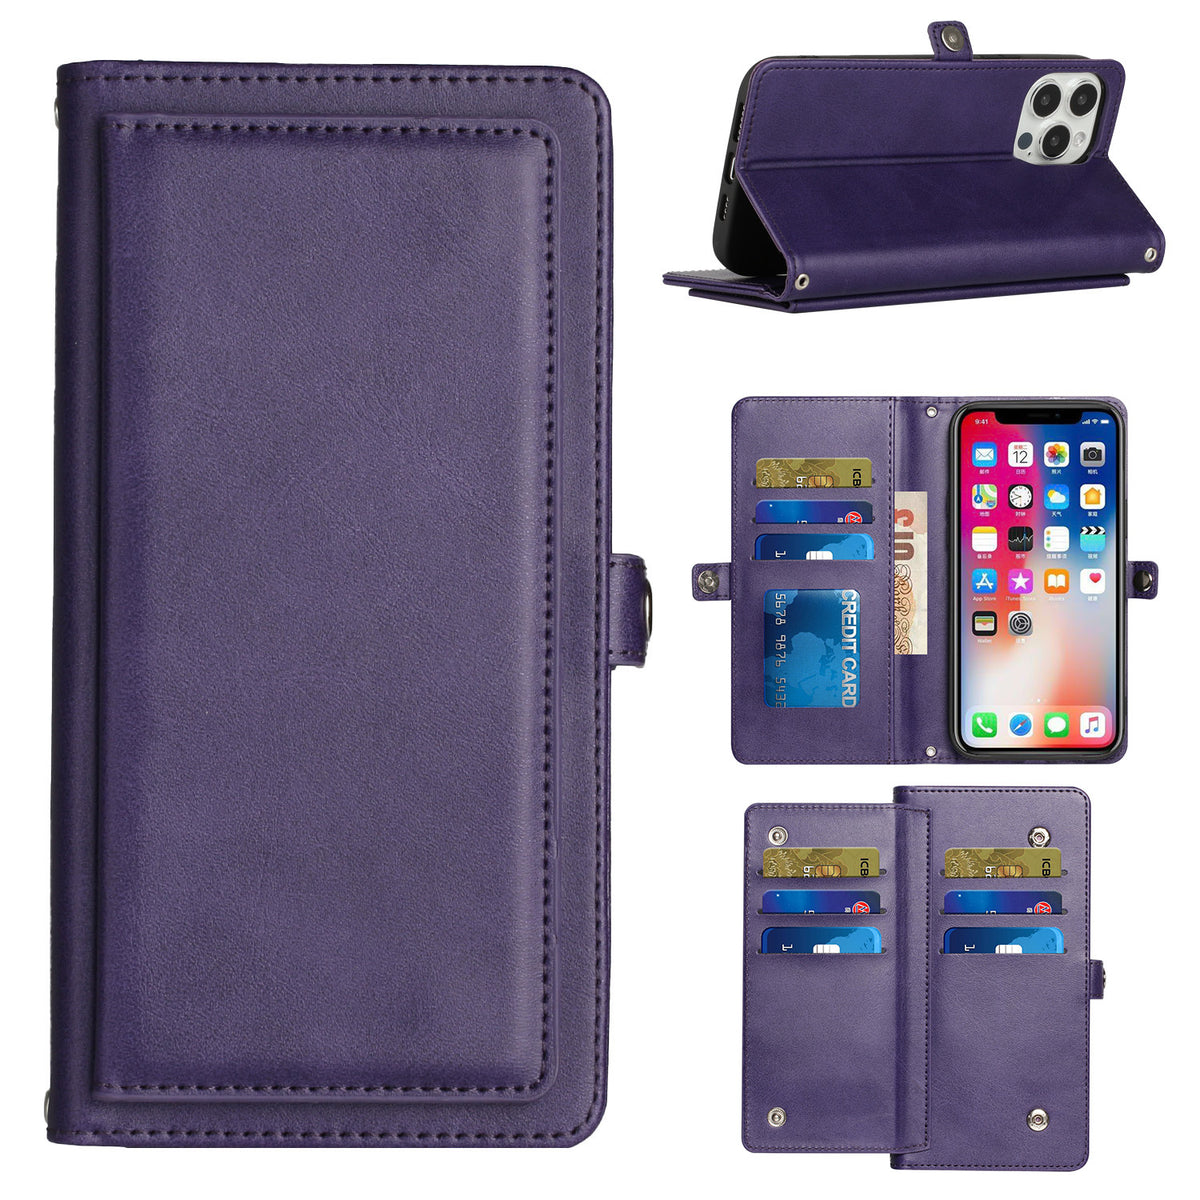 Iphone 11 (6.1Inch) Wallet Flip Case with 9 card slots button lock Purple